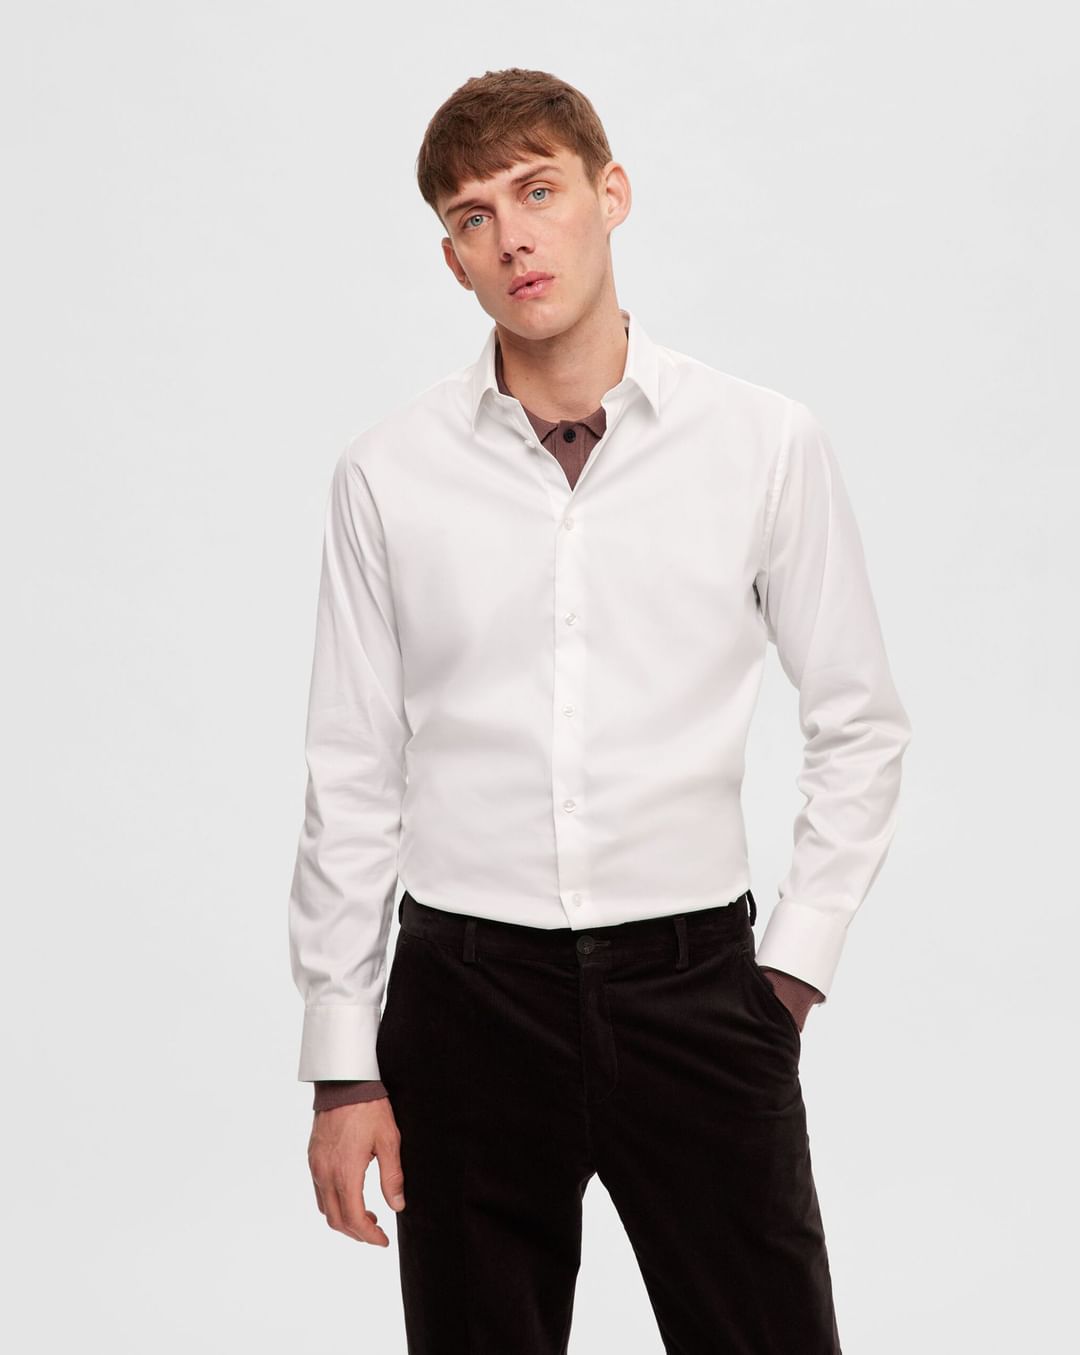 Buy White Full for at Selected Homme Sleeves Online Men Shirts 408016 